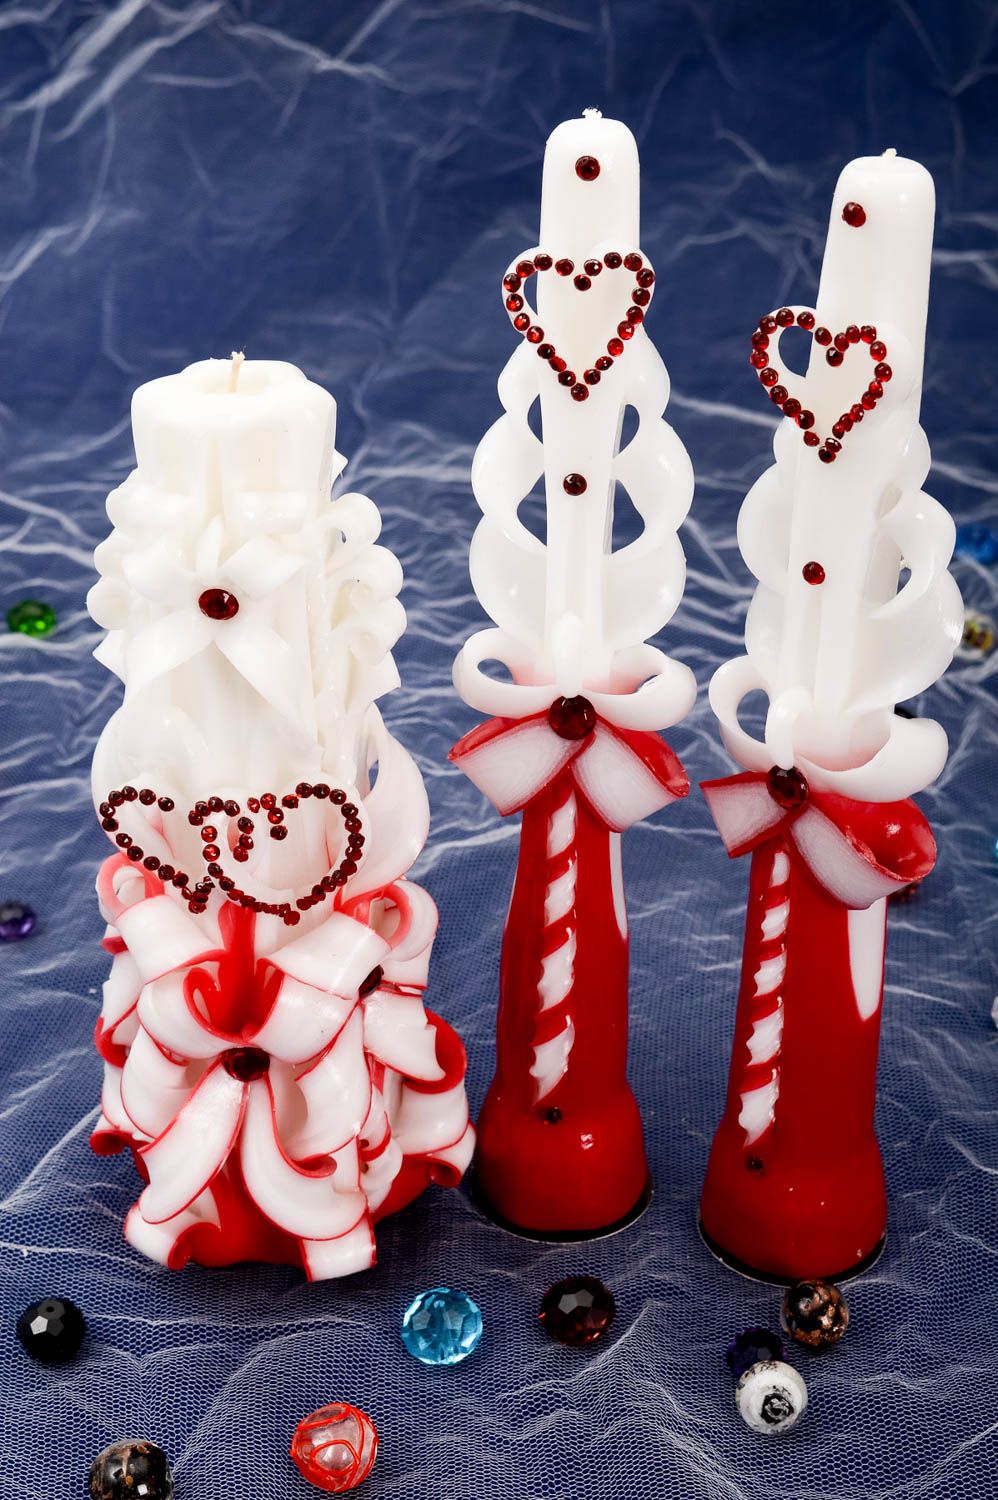 Carved handmade candles wedding candles handmade gifts home decor ideas photo 1